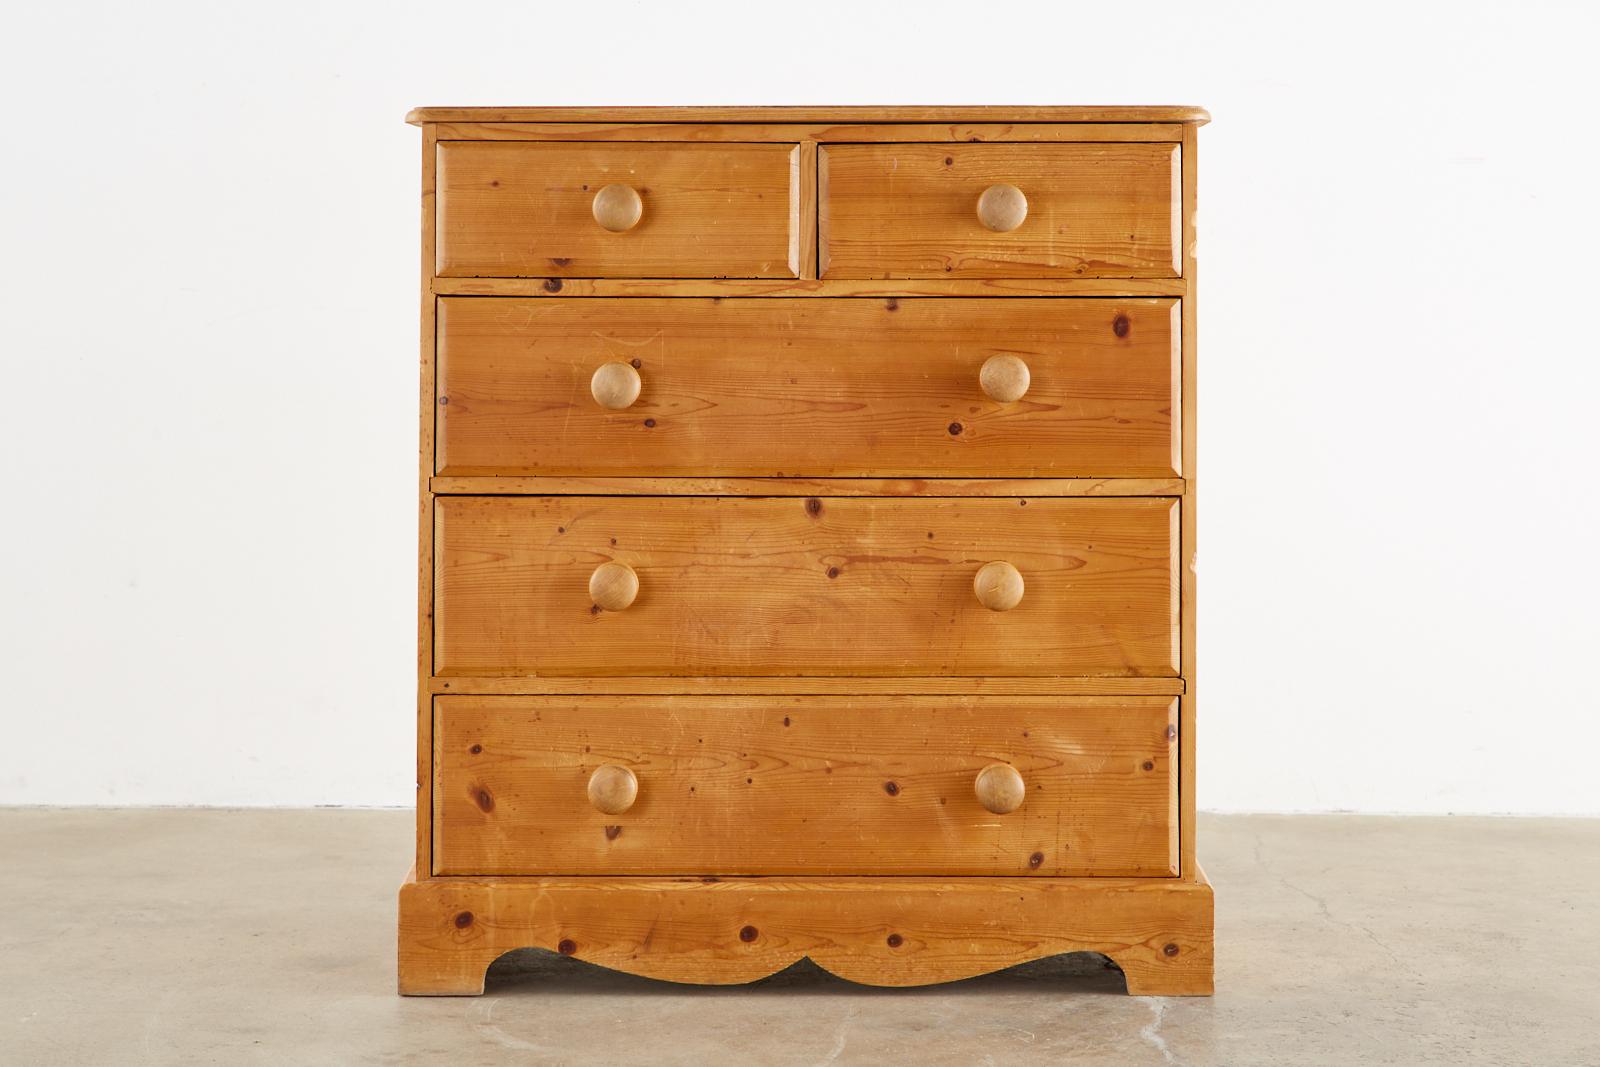 Rustic English pine five-drawer dresser commode or chest of drawers featuring a natural patina. Simple and sturdy with round wood pulls on the drawers. The front has bracket feet with a shaped apron.